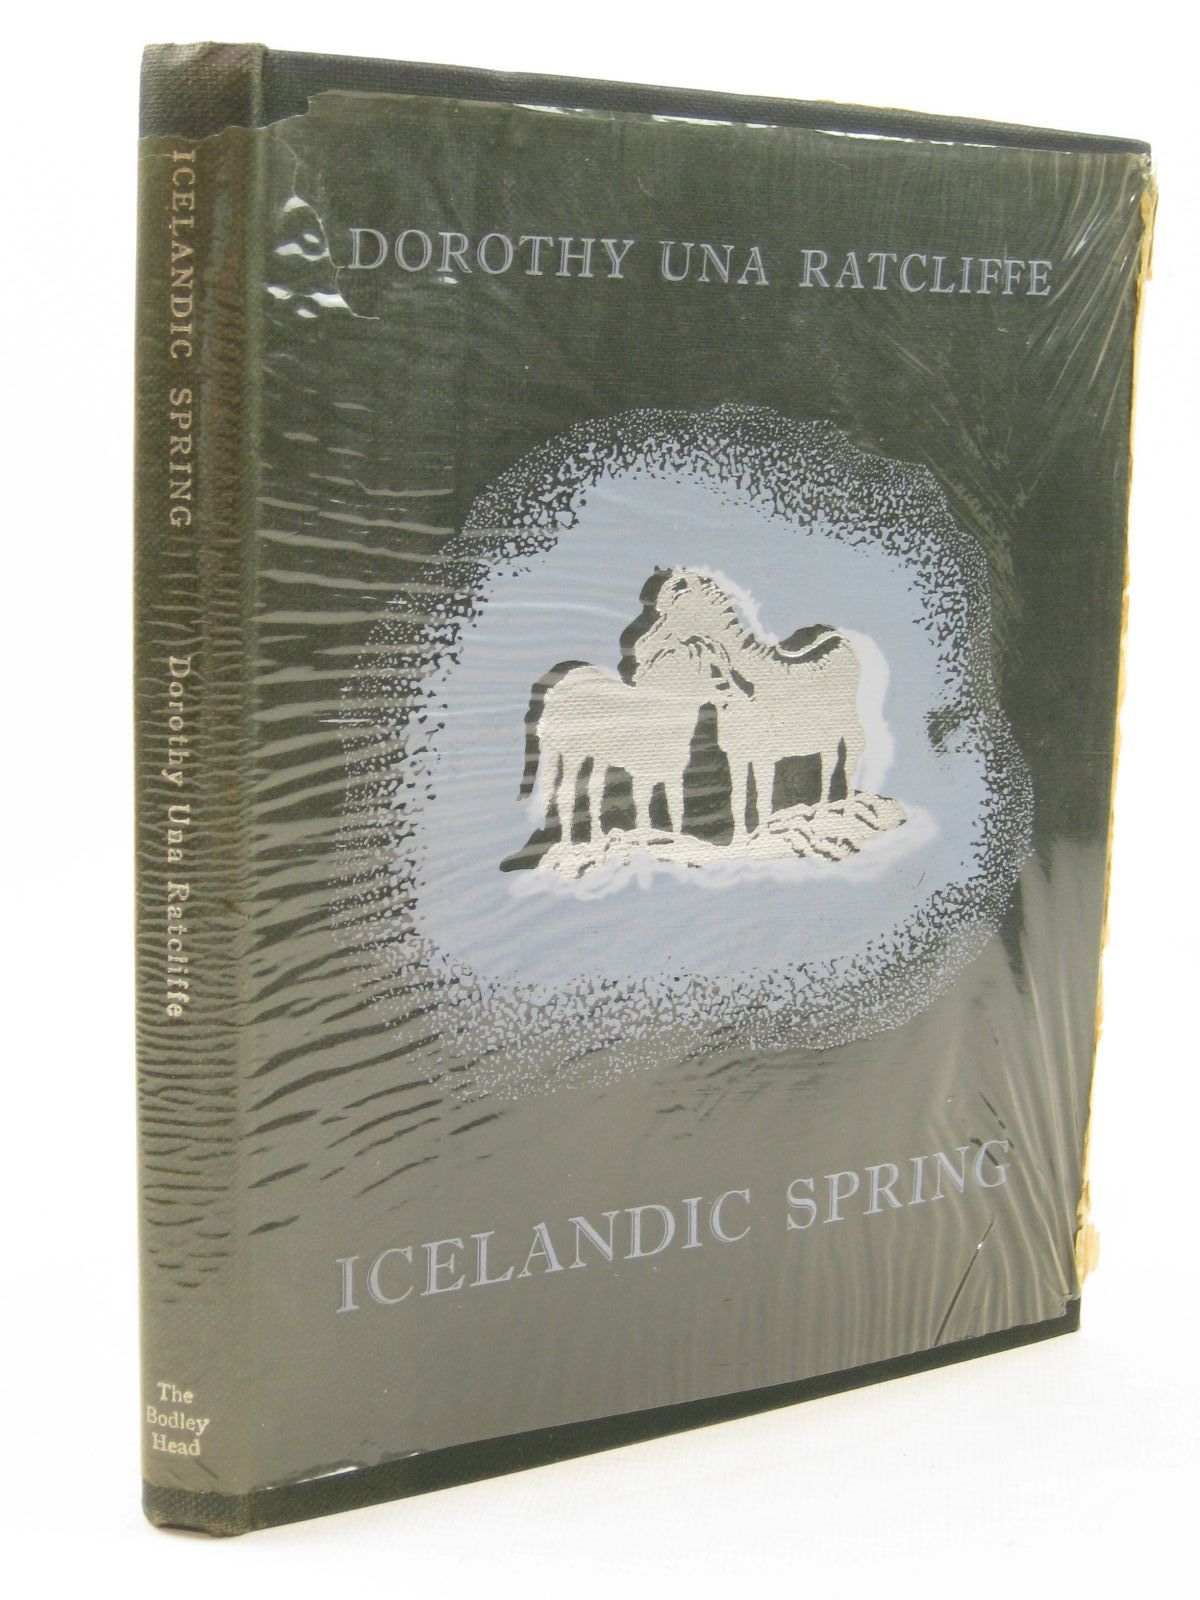 Cover of ICELANDIC SPRING by Dorothy Una Ratcliffe